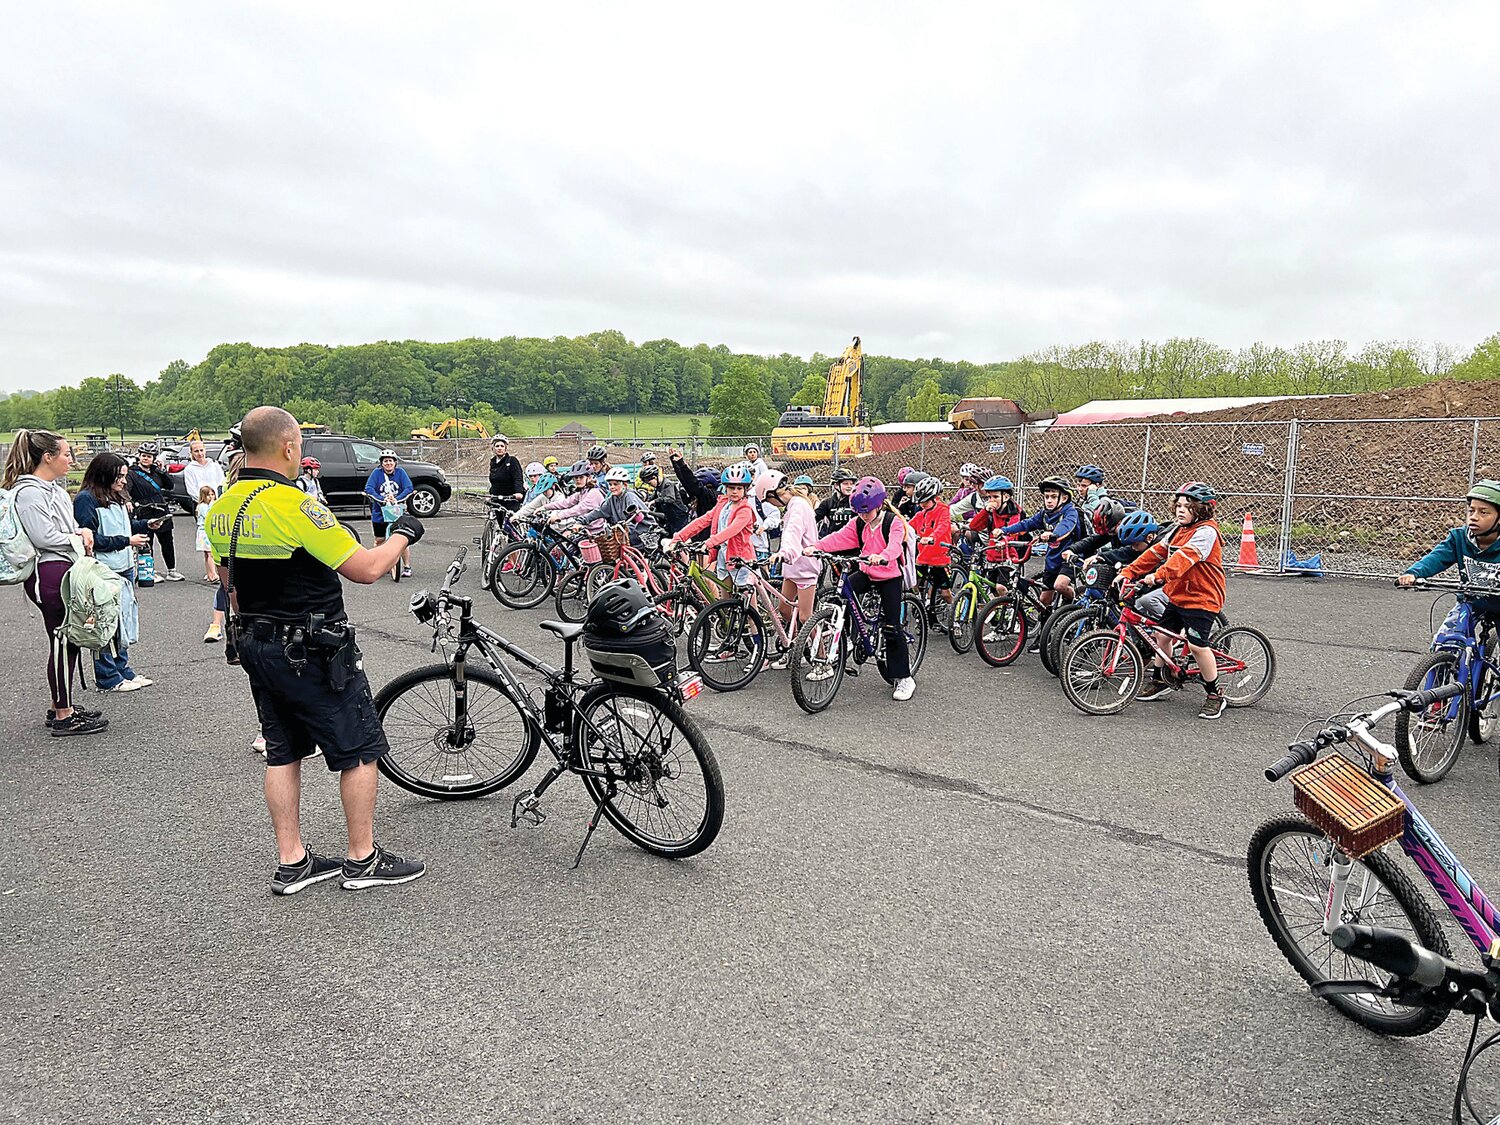 Buckingham Elementary students joined Doylestown Township Police Officer Jared Courts and TMA Bucks staff for a bike ride in Doylestown.